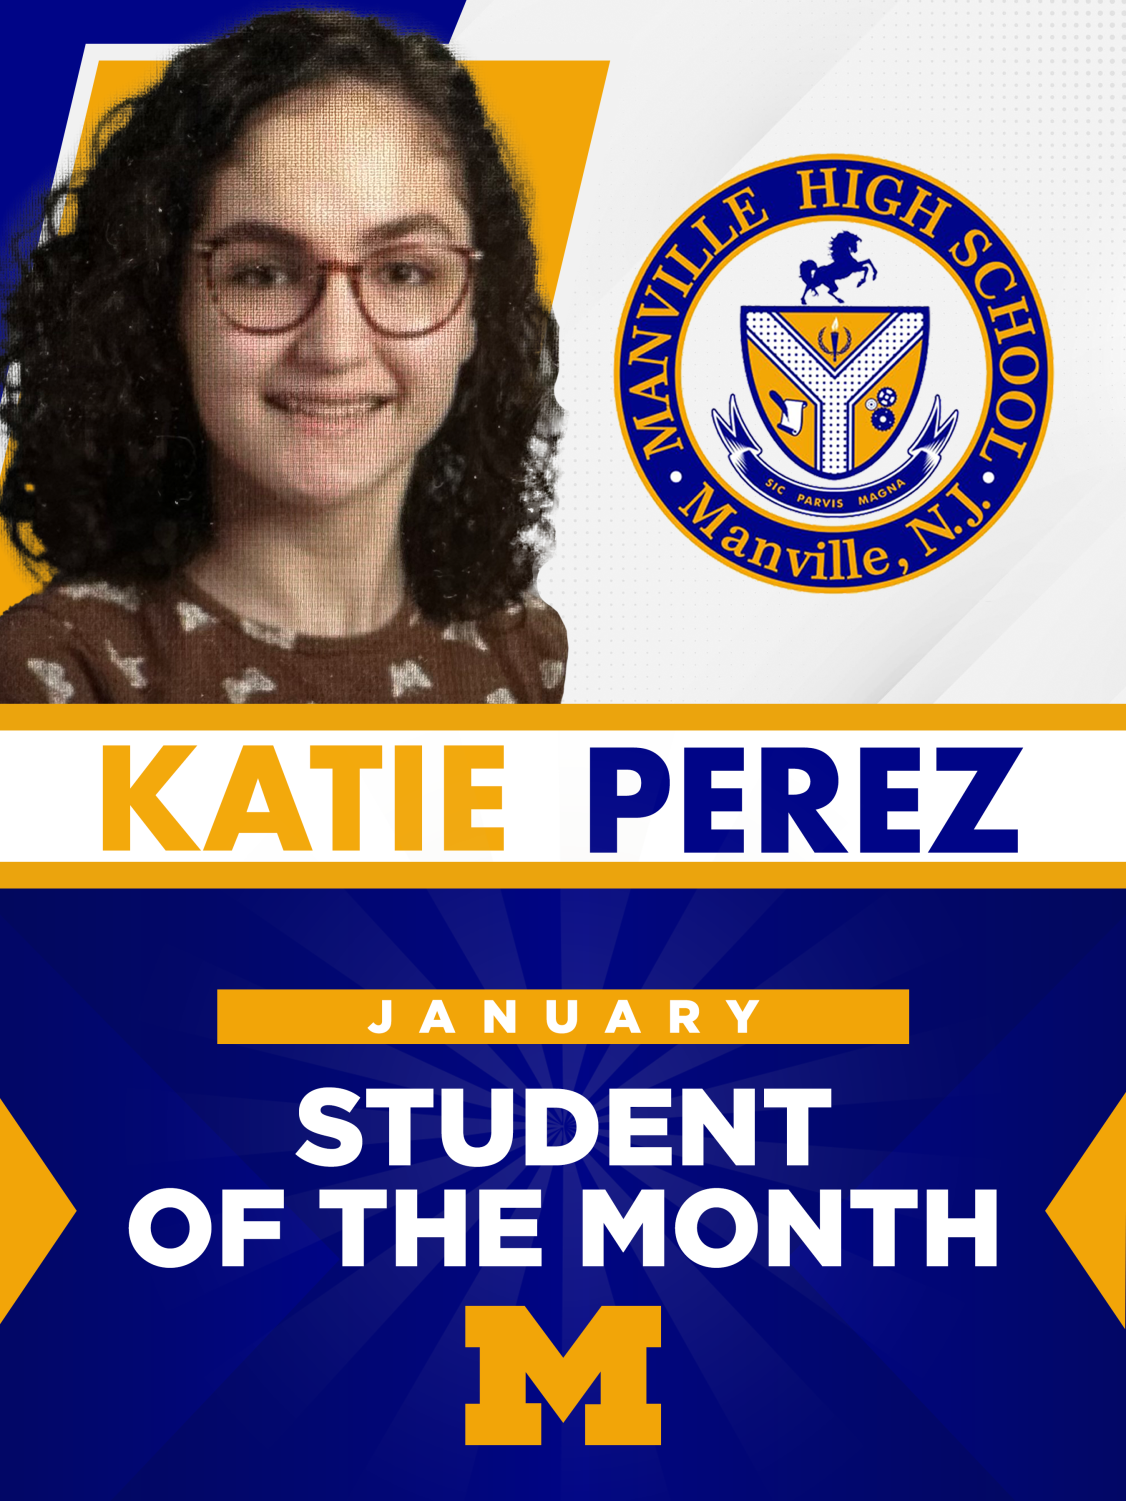 Katie Perez Student of the Month for January